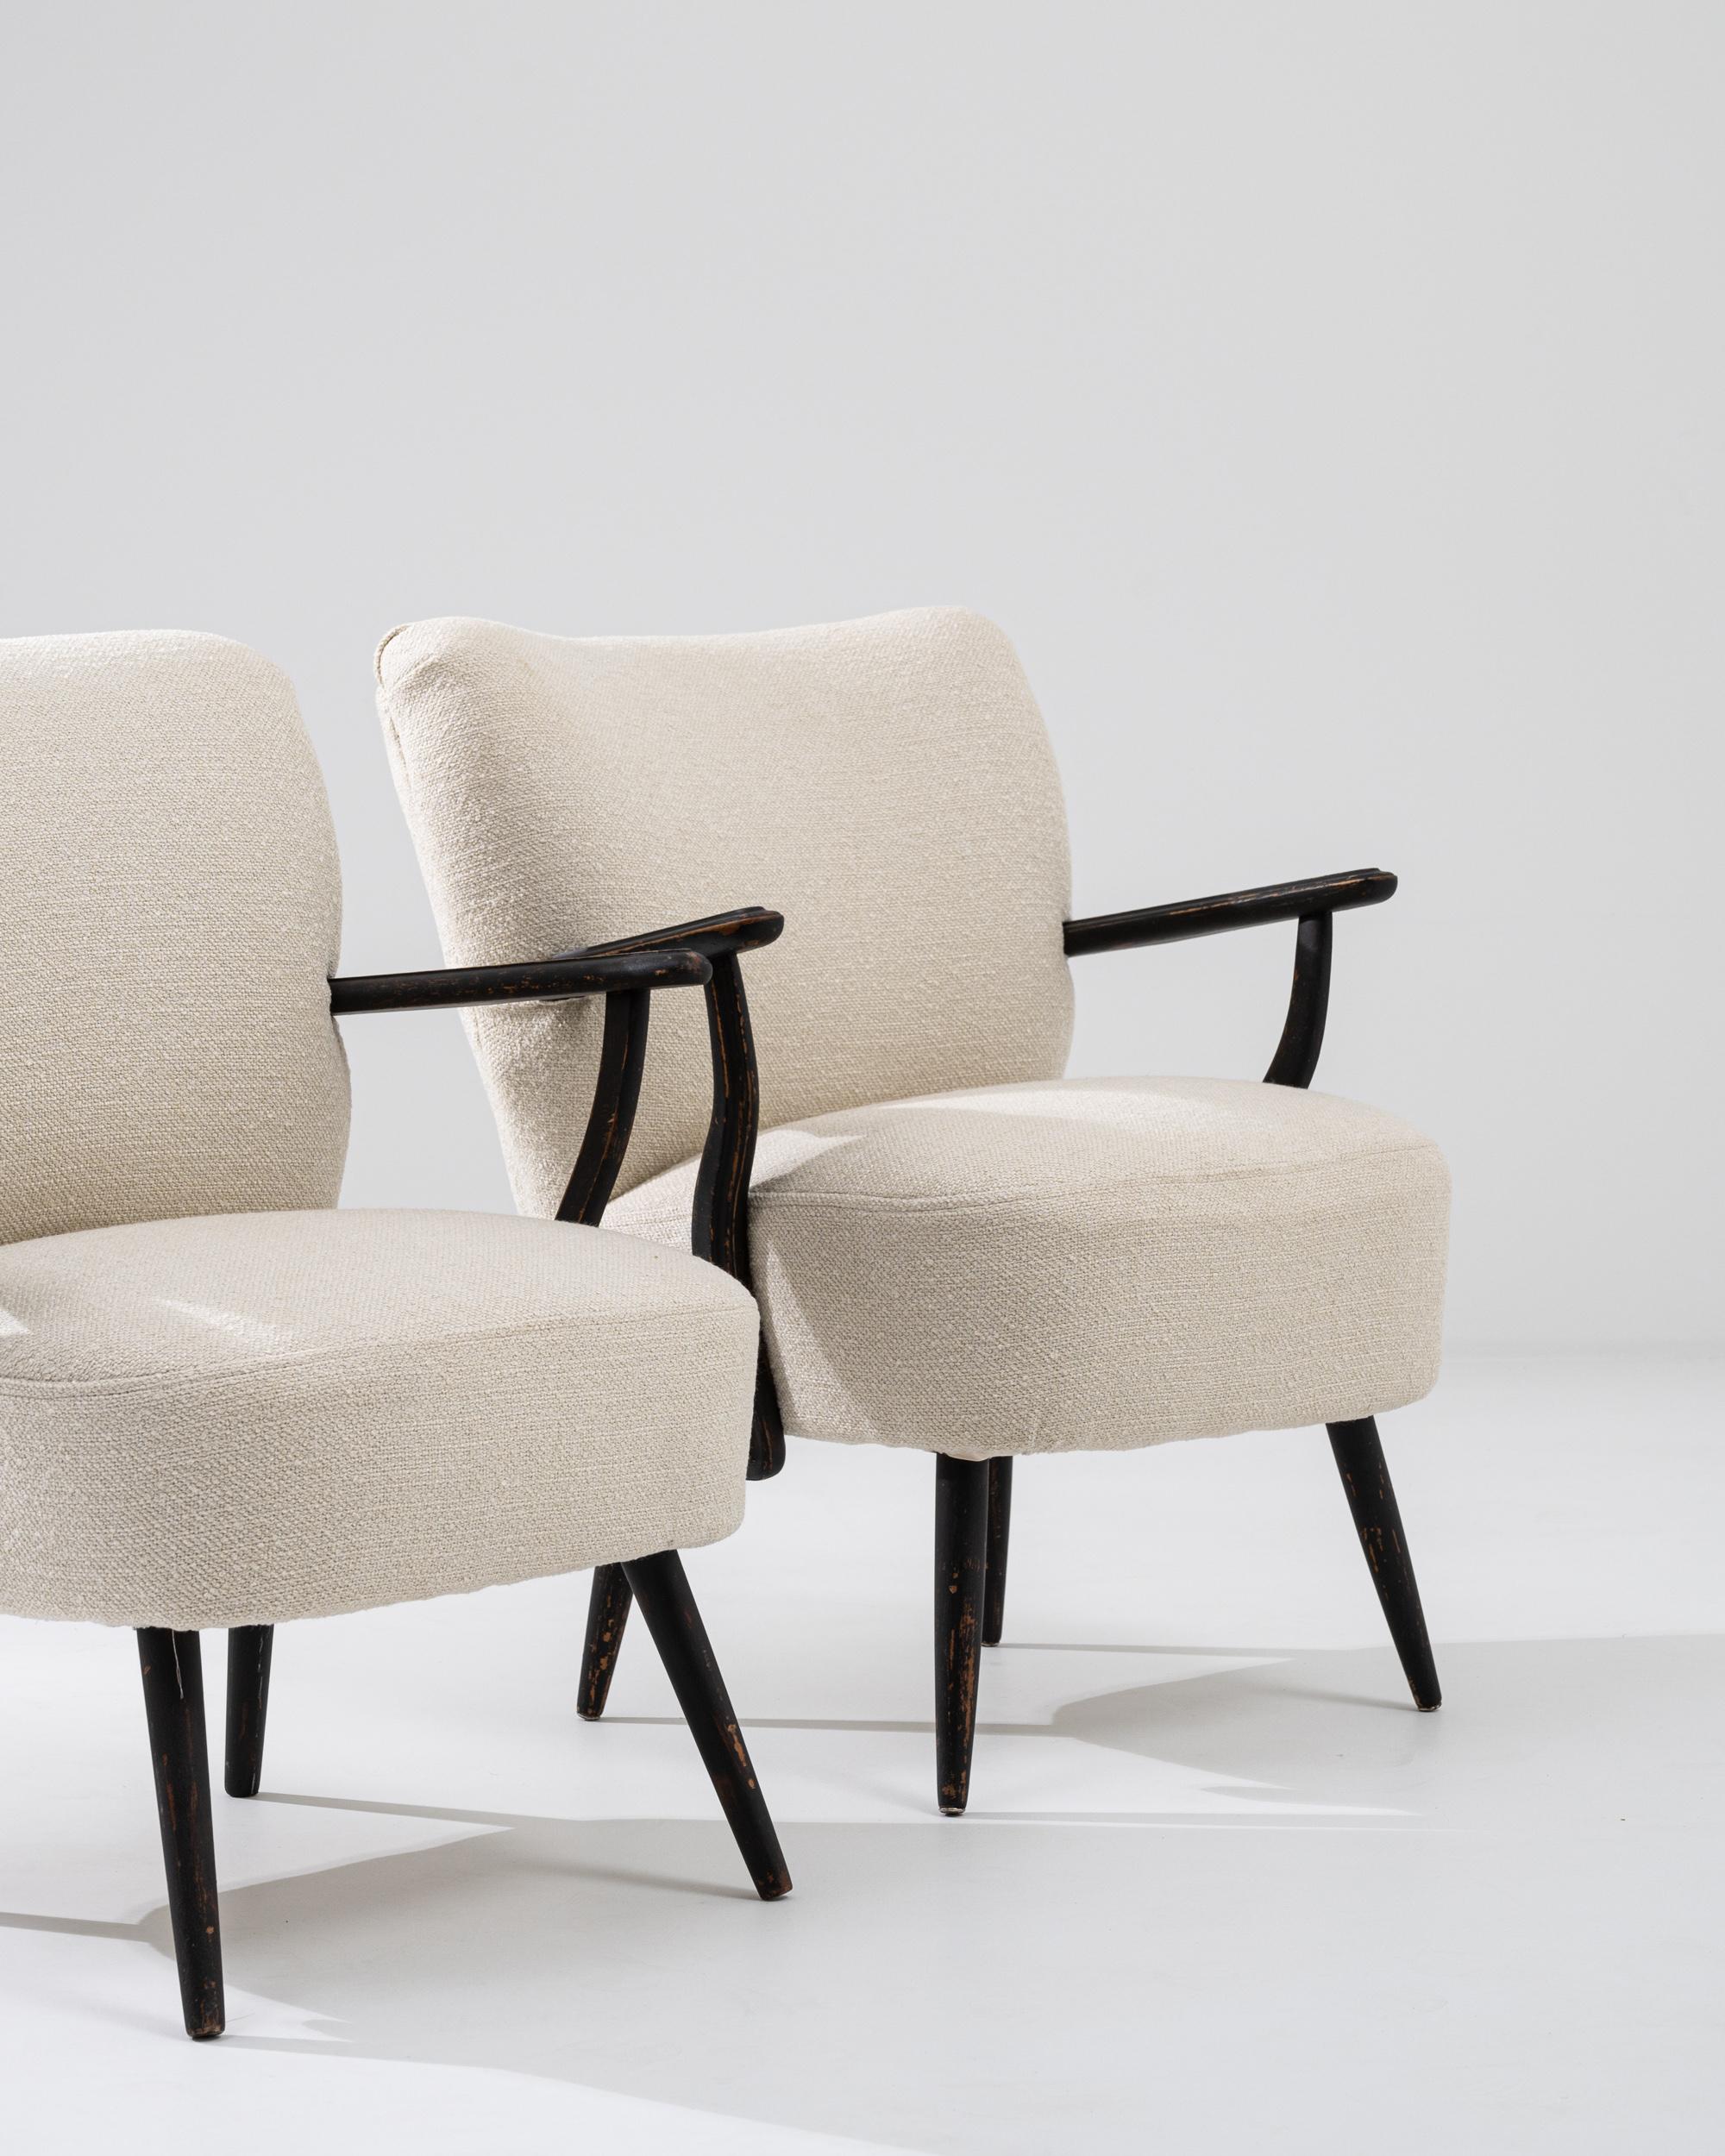 1950s Danish Modern Upholstered Armchairs, a Pair For Sale 3